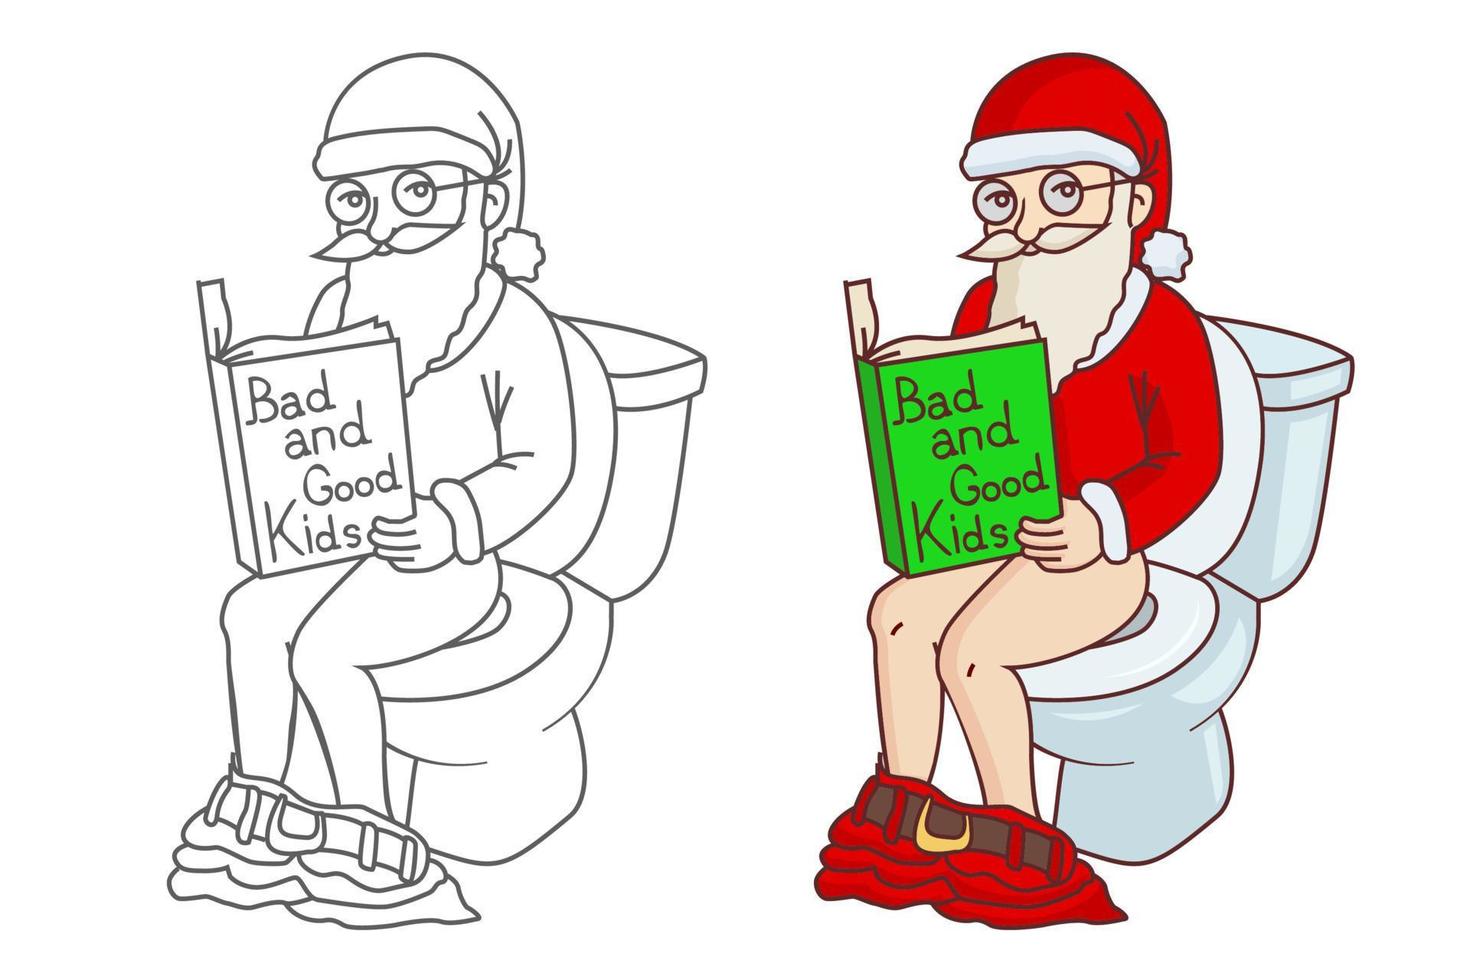 Santa sitting on toilet and reading book about bad and good kids. Funny Christmas humor illustration. vector